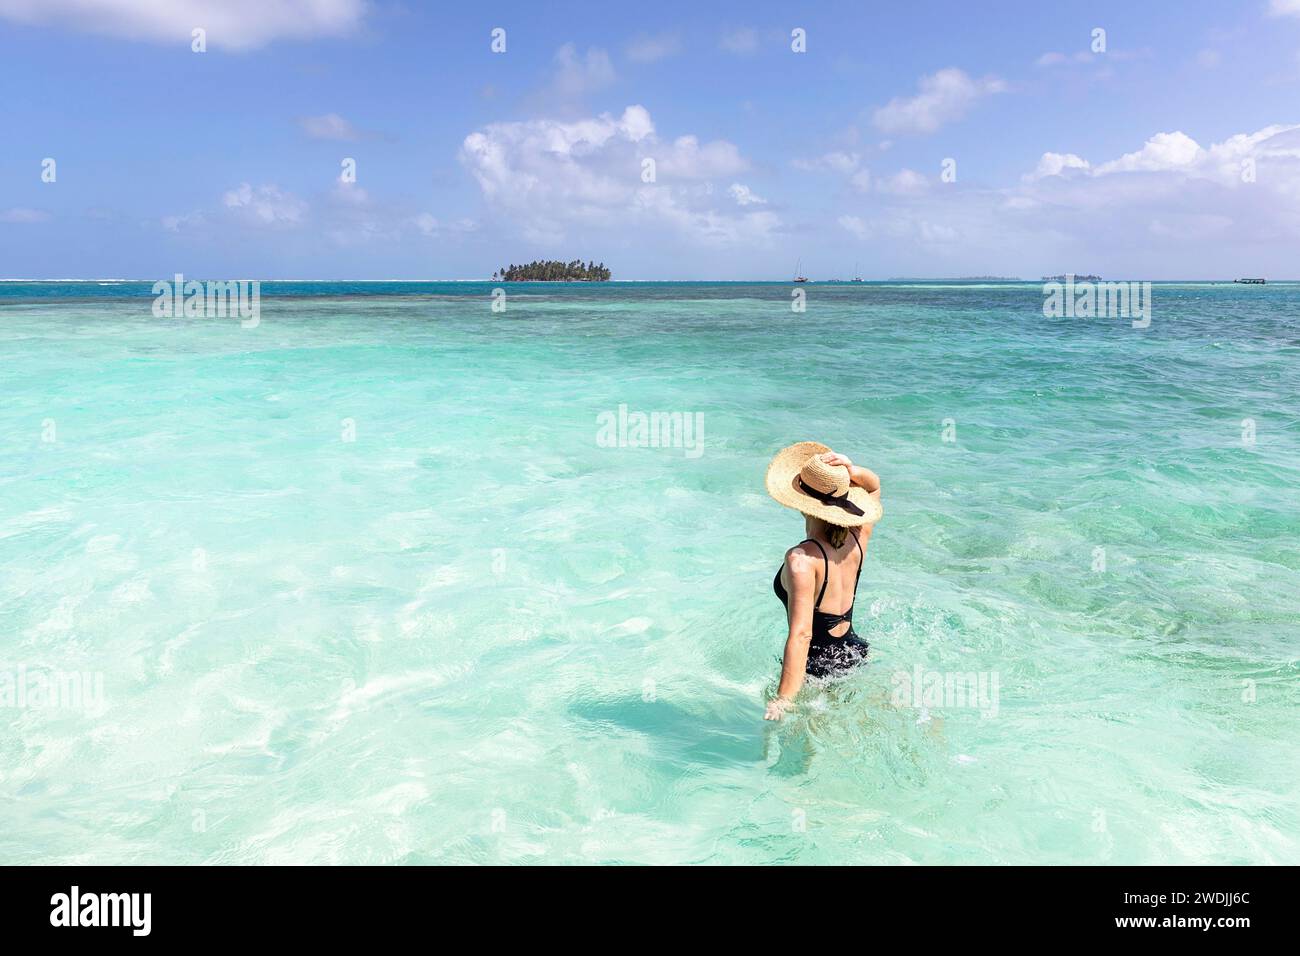 Woman tourist with a straw hat walking in swimsuit in a turquoise shalllow water with a tropical island at the back, San blas, Caribbean sea, Panama Stock Photo